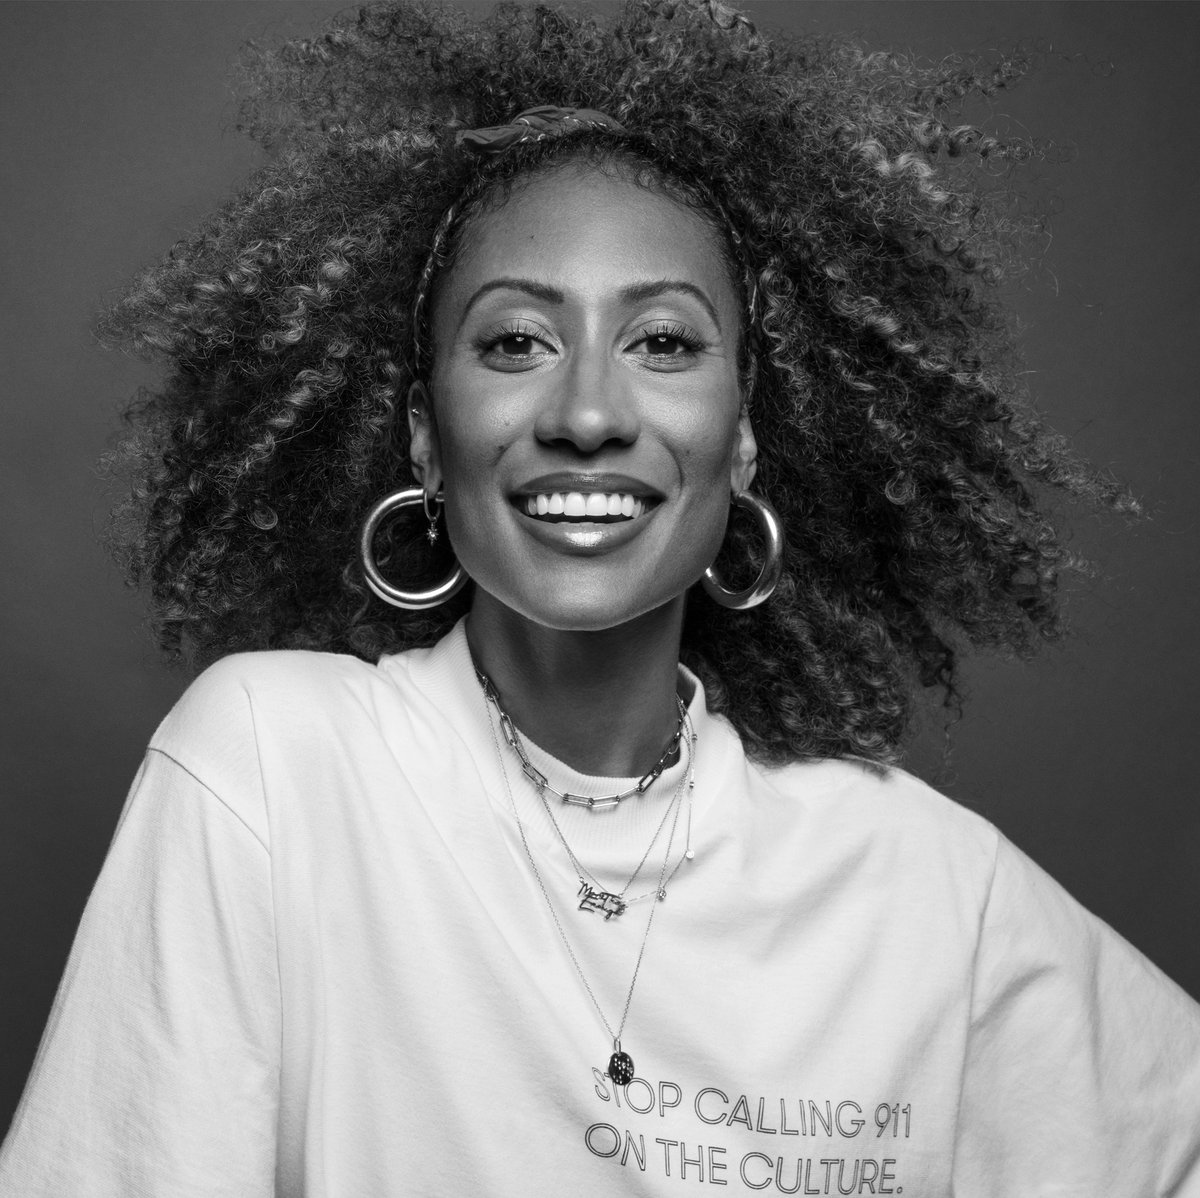 'When your dreams are bigger than the places you find yourself in, sometimes you need to seek out your own reminders that there is more. And there is always more waiting for you on the other side of fear.' —Elaine Welteroth, More Than Enough #FridayFeeling #quote